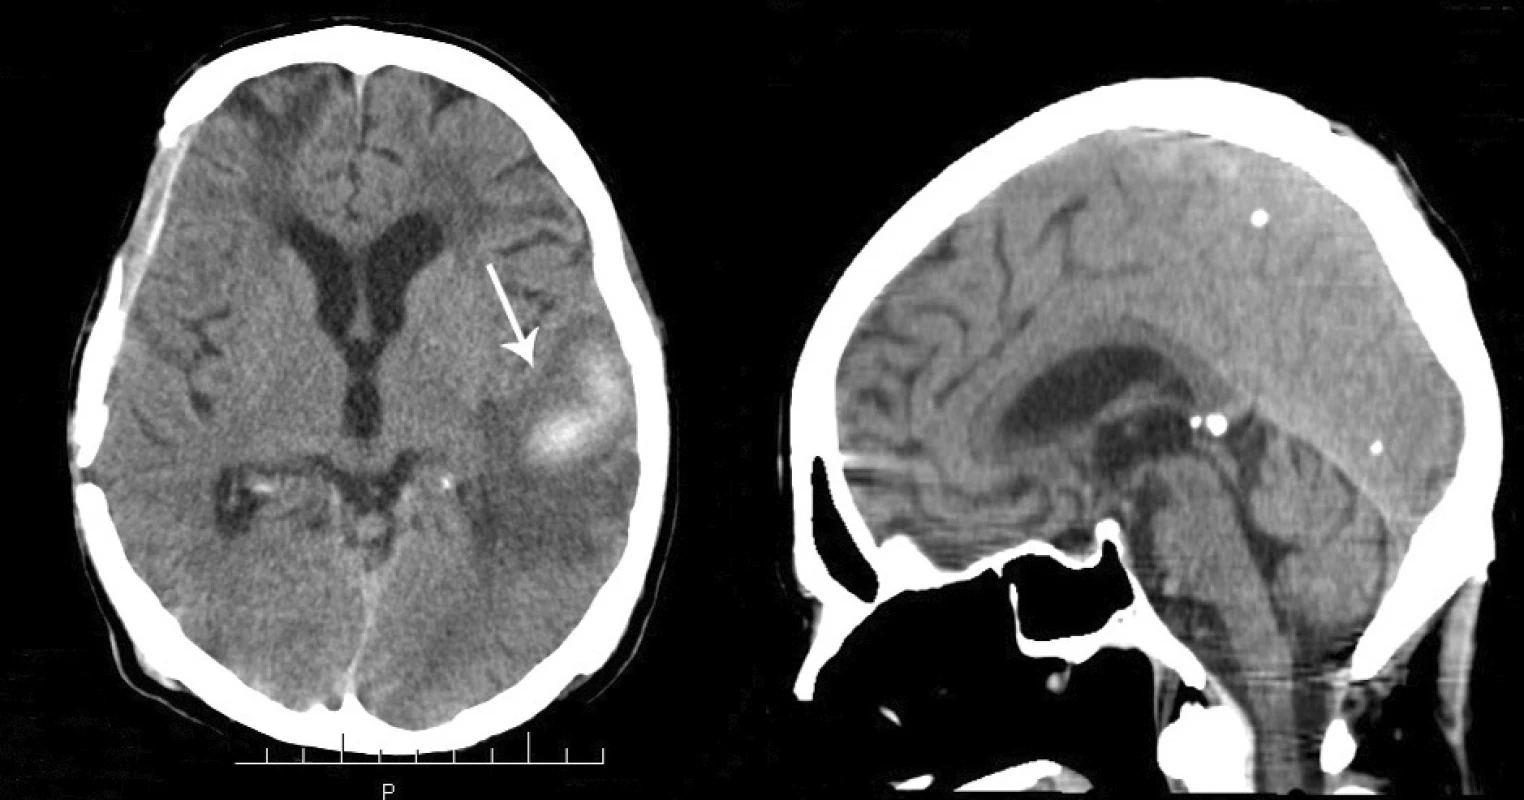 A – resolution of the previously observed contusion and hematoma
of the left temporal lobe. B – CT scan (sagittal section), diffuse cerebral and
cerebellar atrophy, complete resolution of the previously observed subdural
hematoma in the posterior fossa.